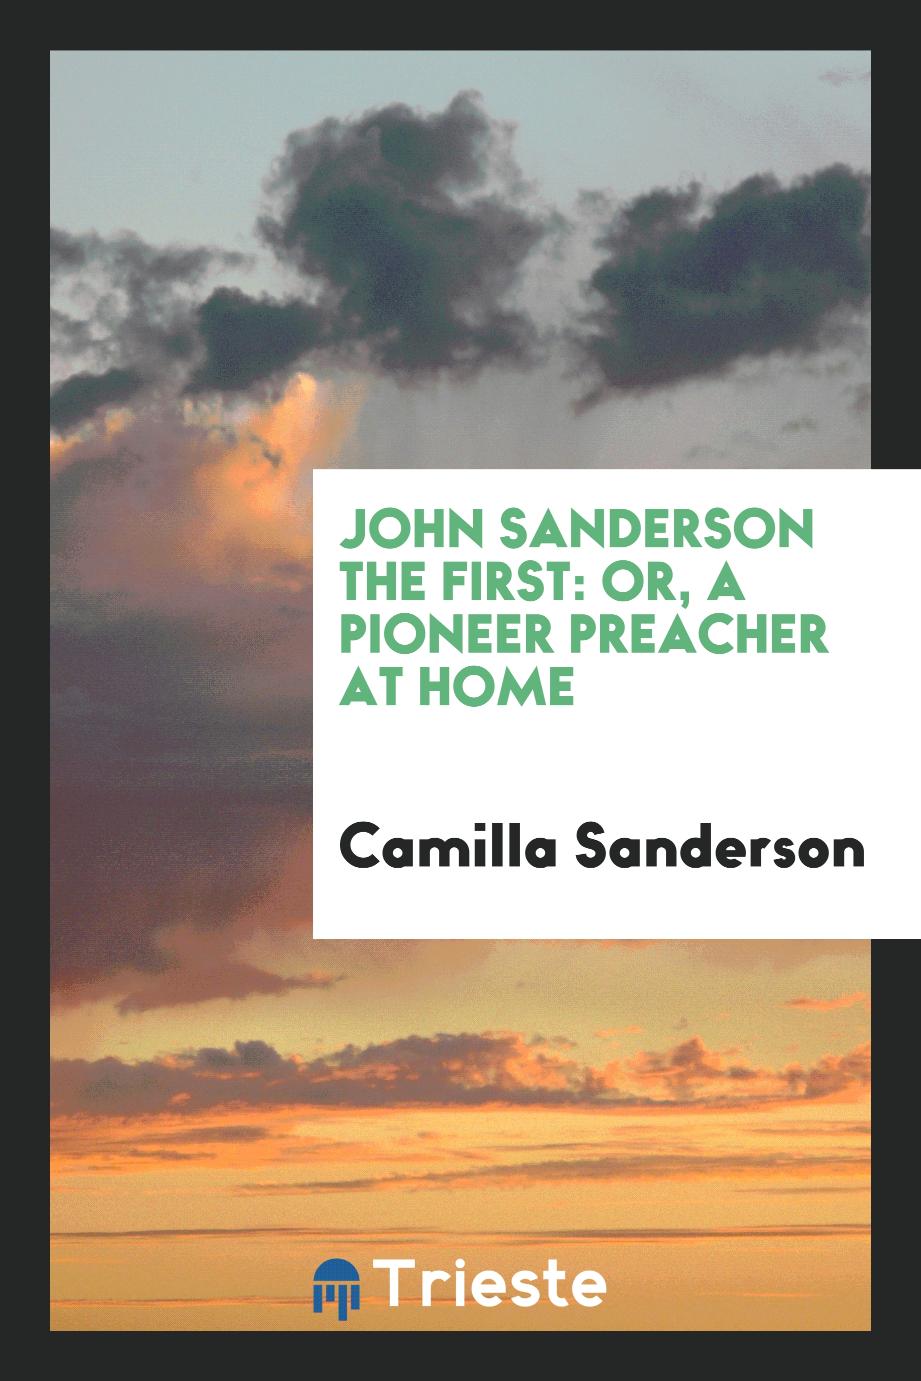 John Sanderson the First: or, A pioneer preacher at home